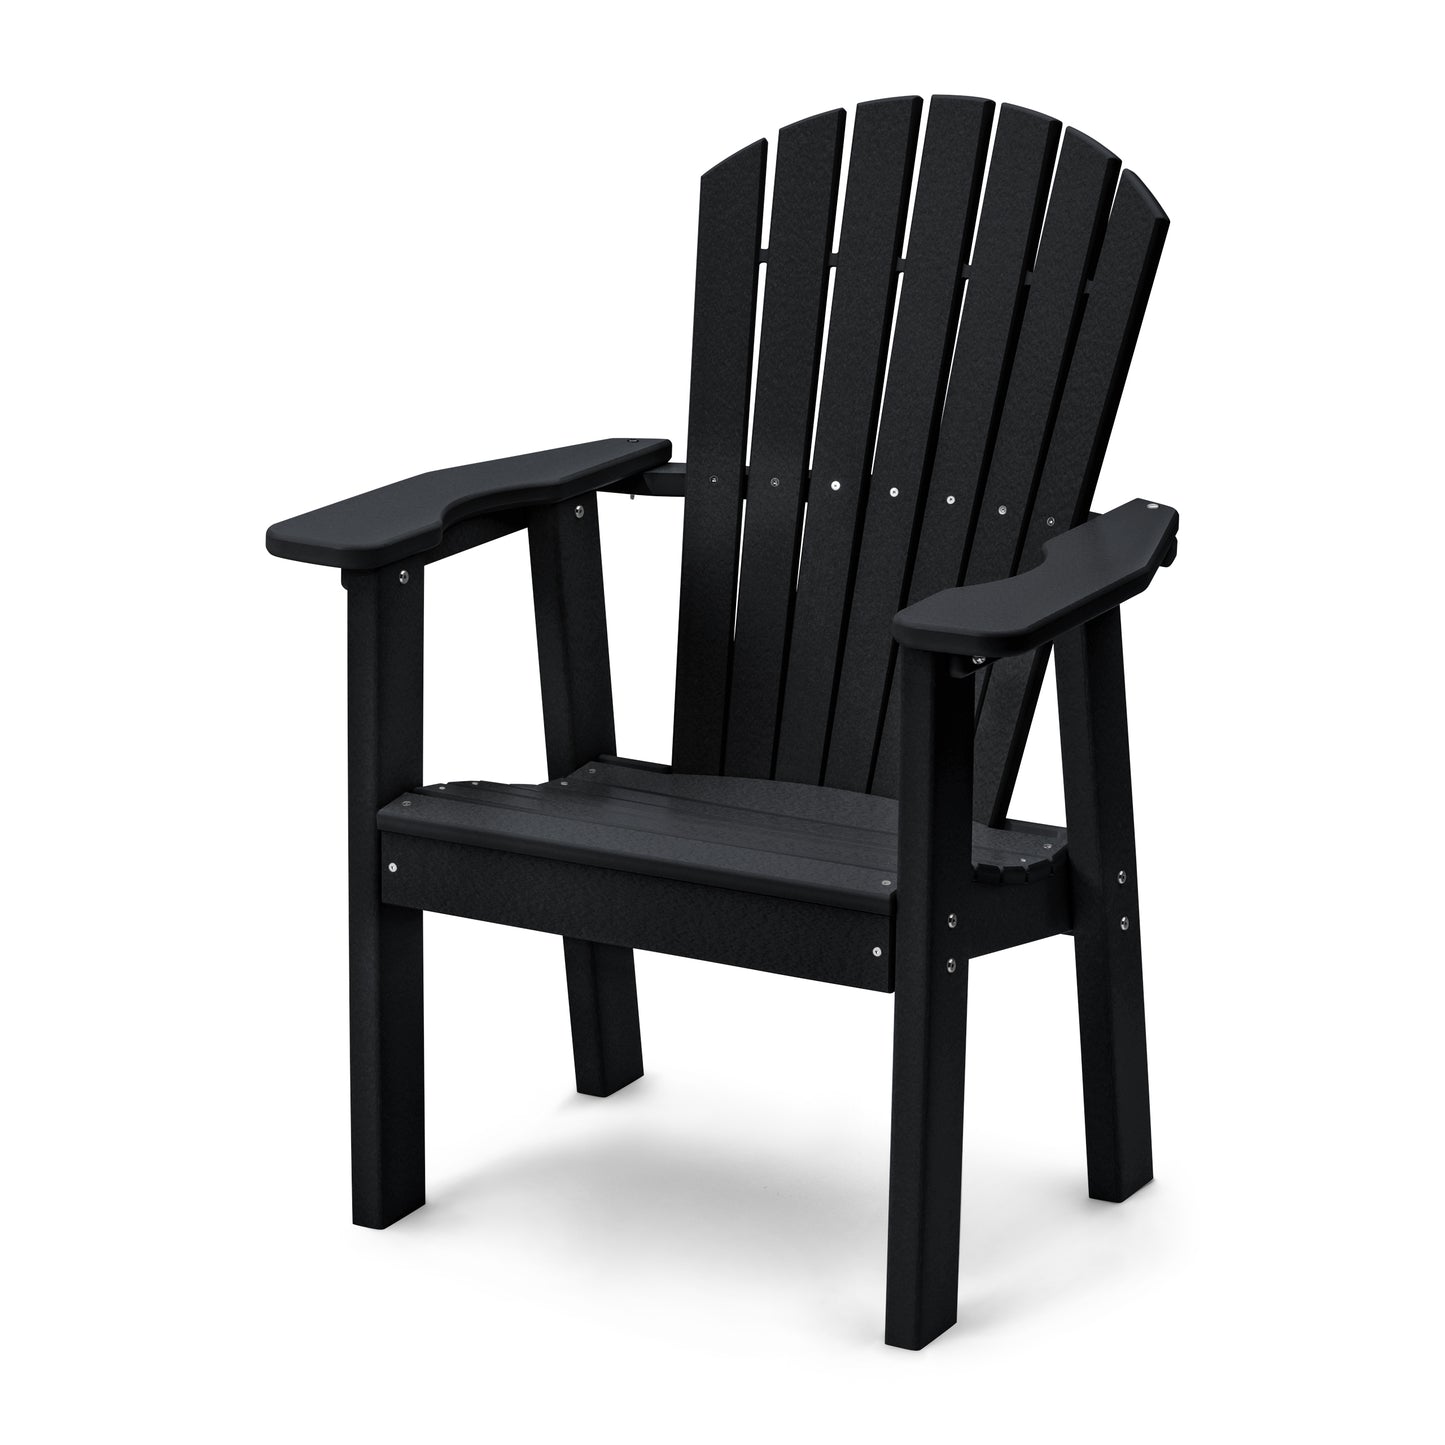 Perfect Choice Recycled Plastic Classic Upright Adirondack Chair - LEAD TIME TO SHIP 4 WEEKS OR LESS